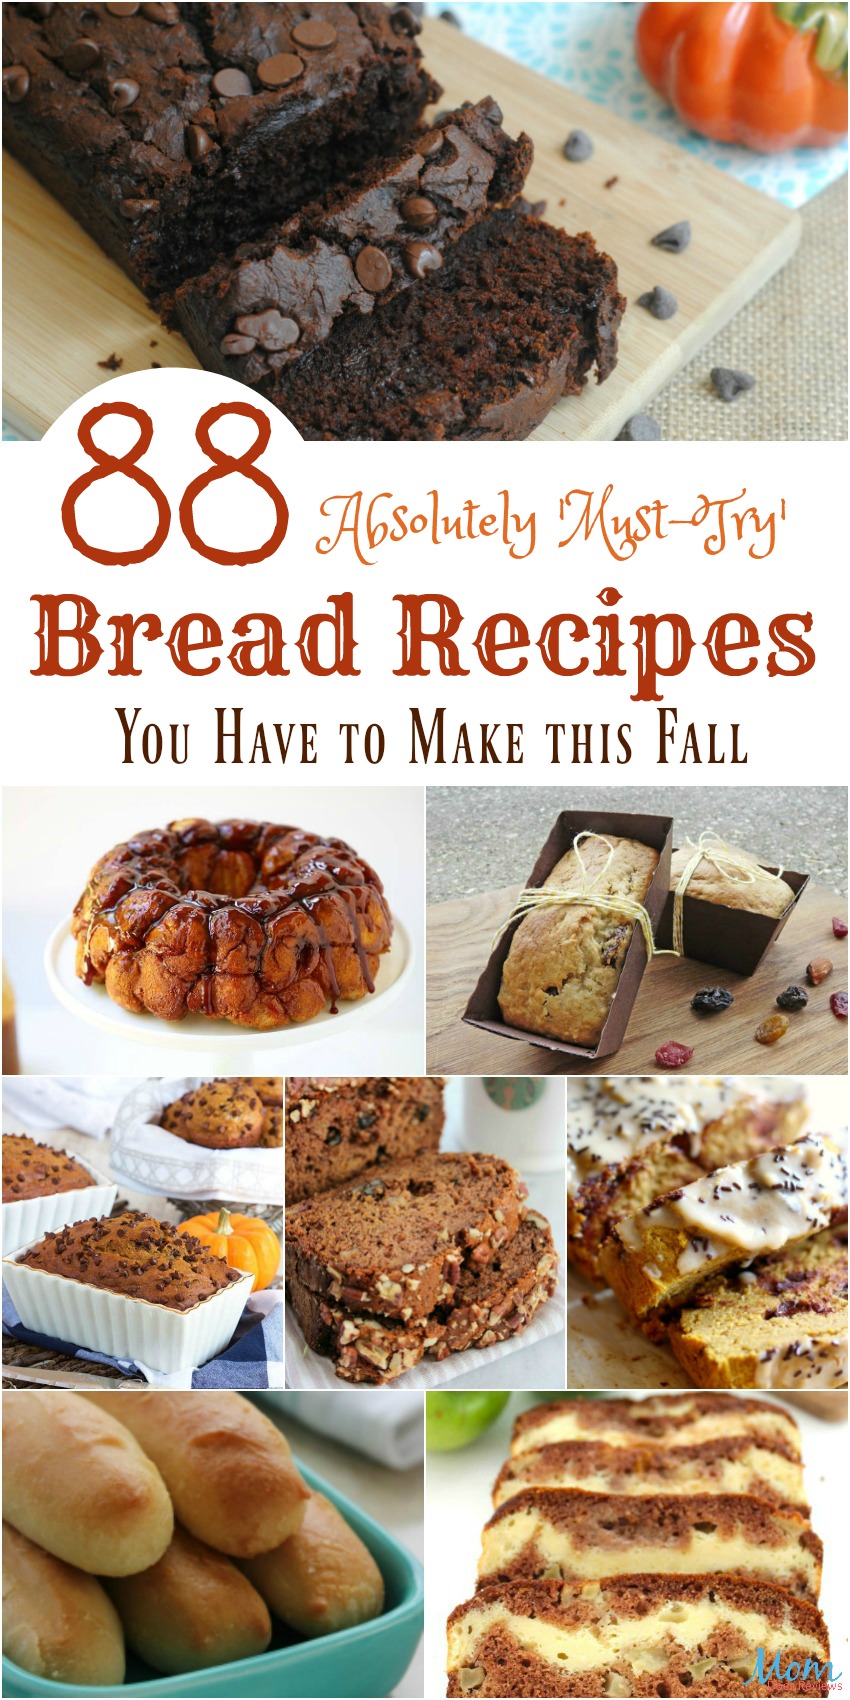 88 Absolutely Must-Try Bread Recipes You Have to Make this Fall